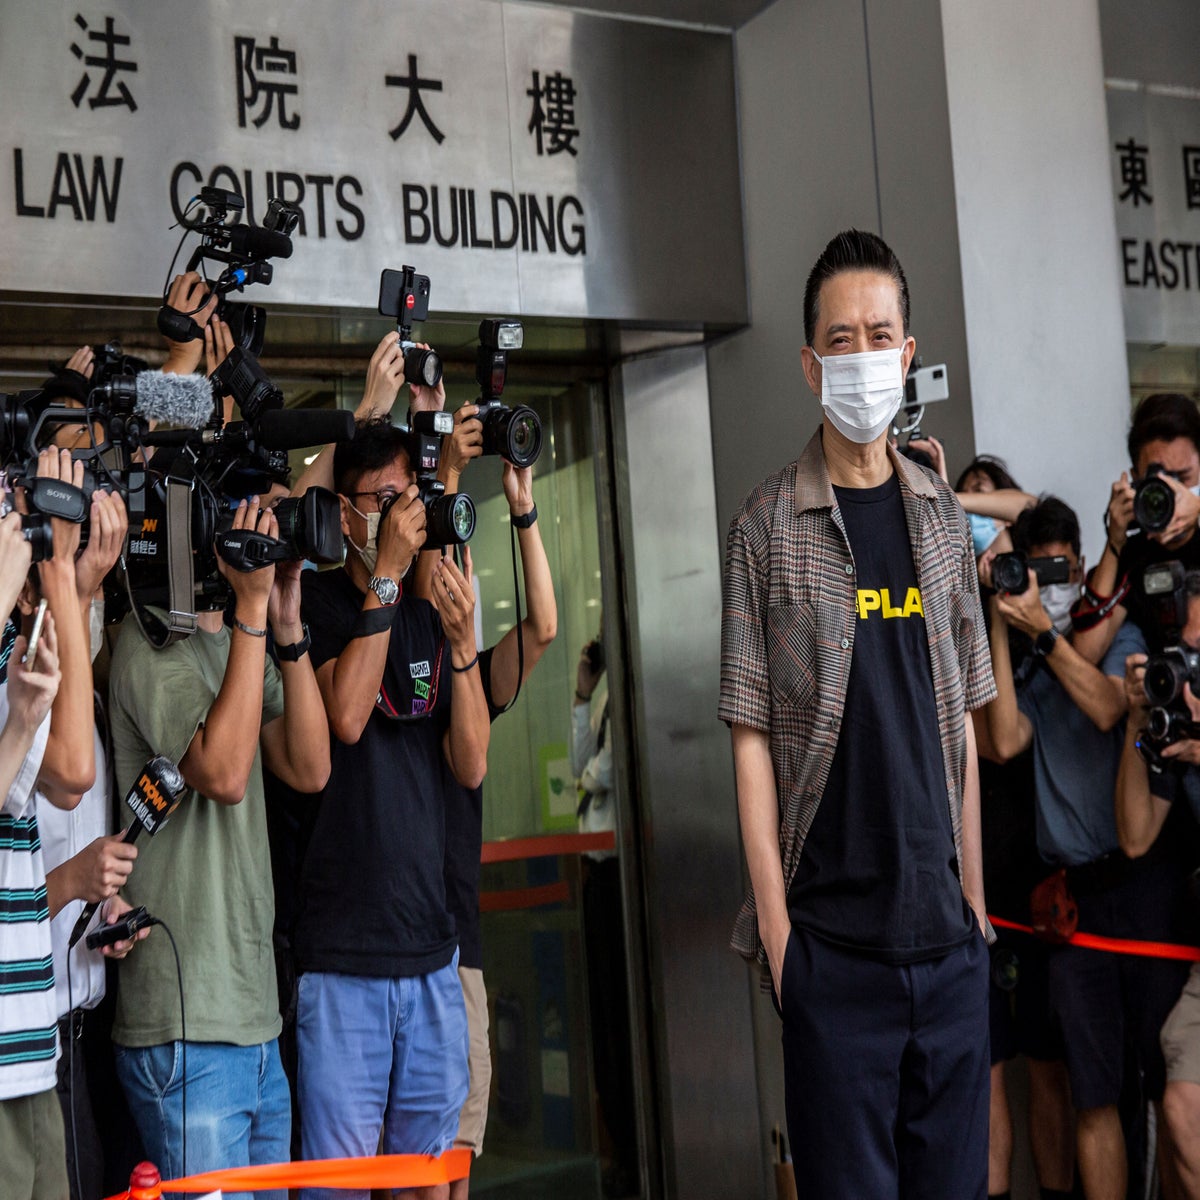 Xxx School Girl S Baigan Sex - Hong Kong prosecutors drop corruption charges against prominent singer and  pro-democracy activist | The Independent